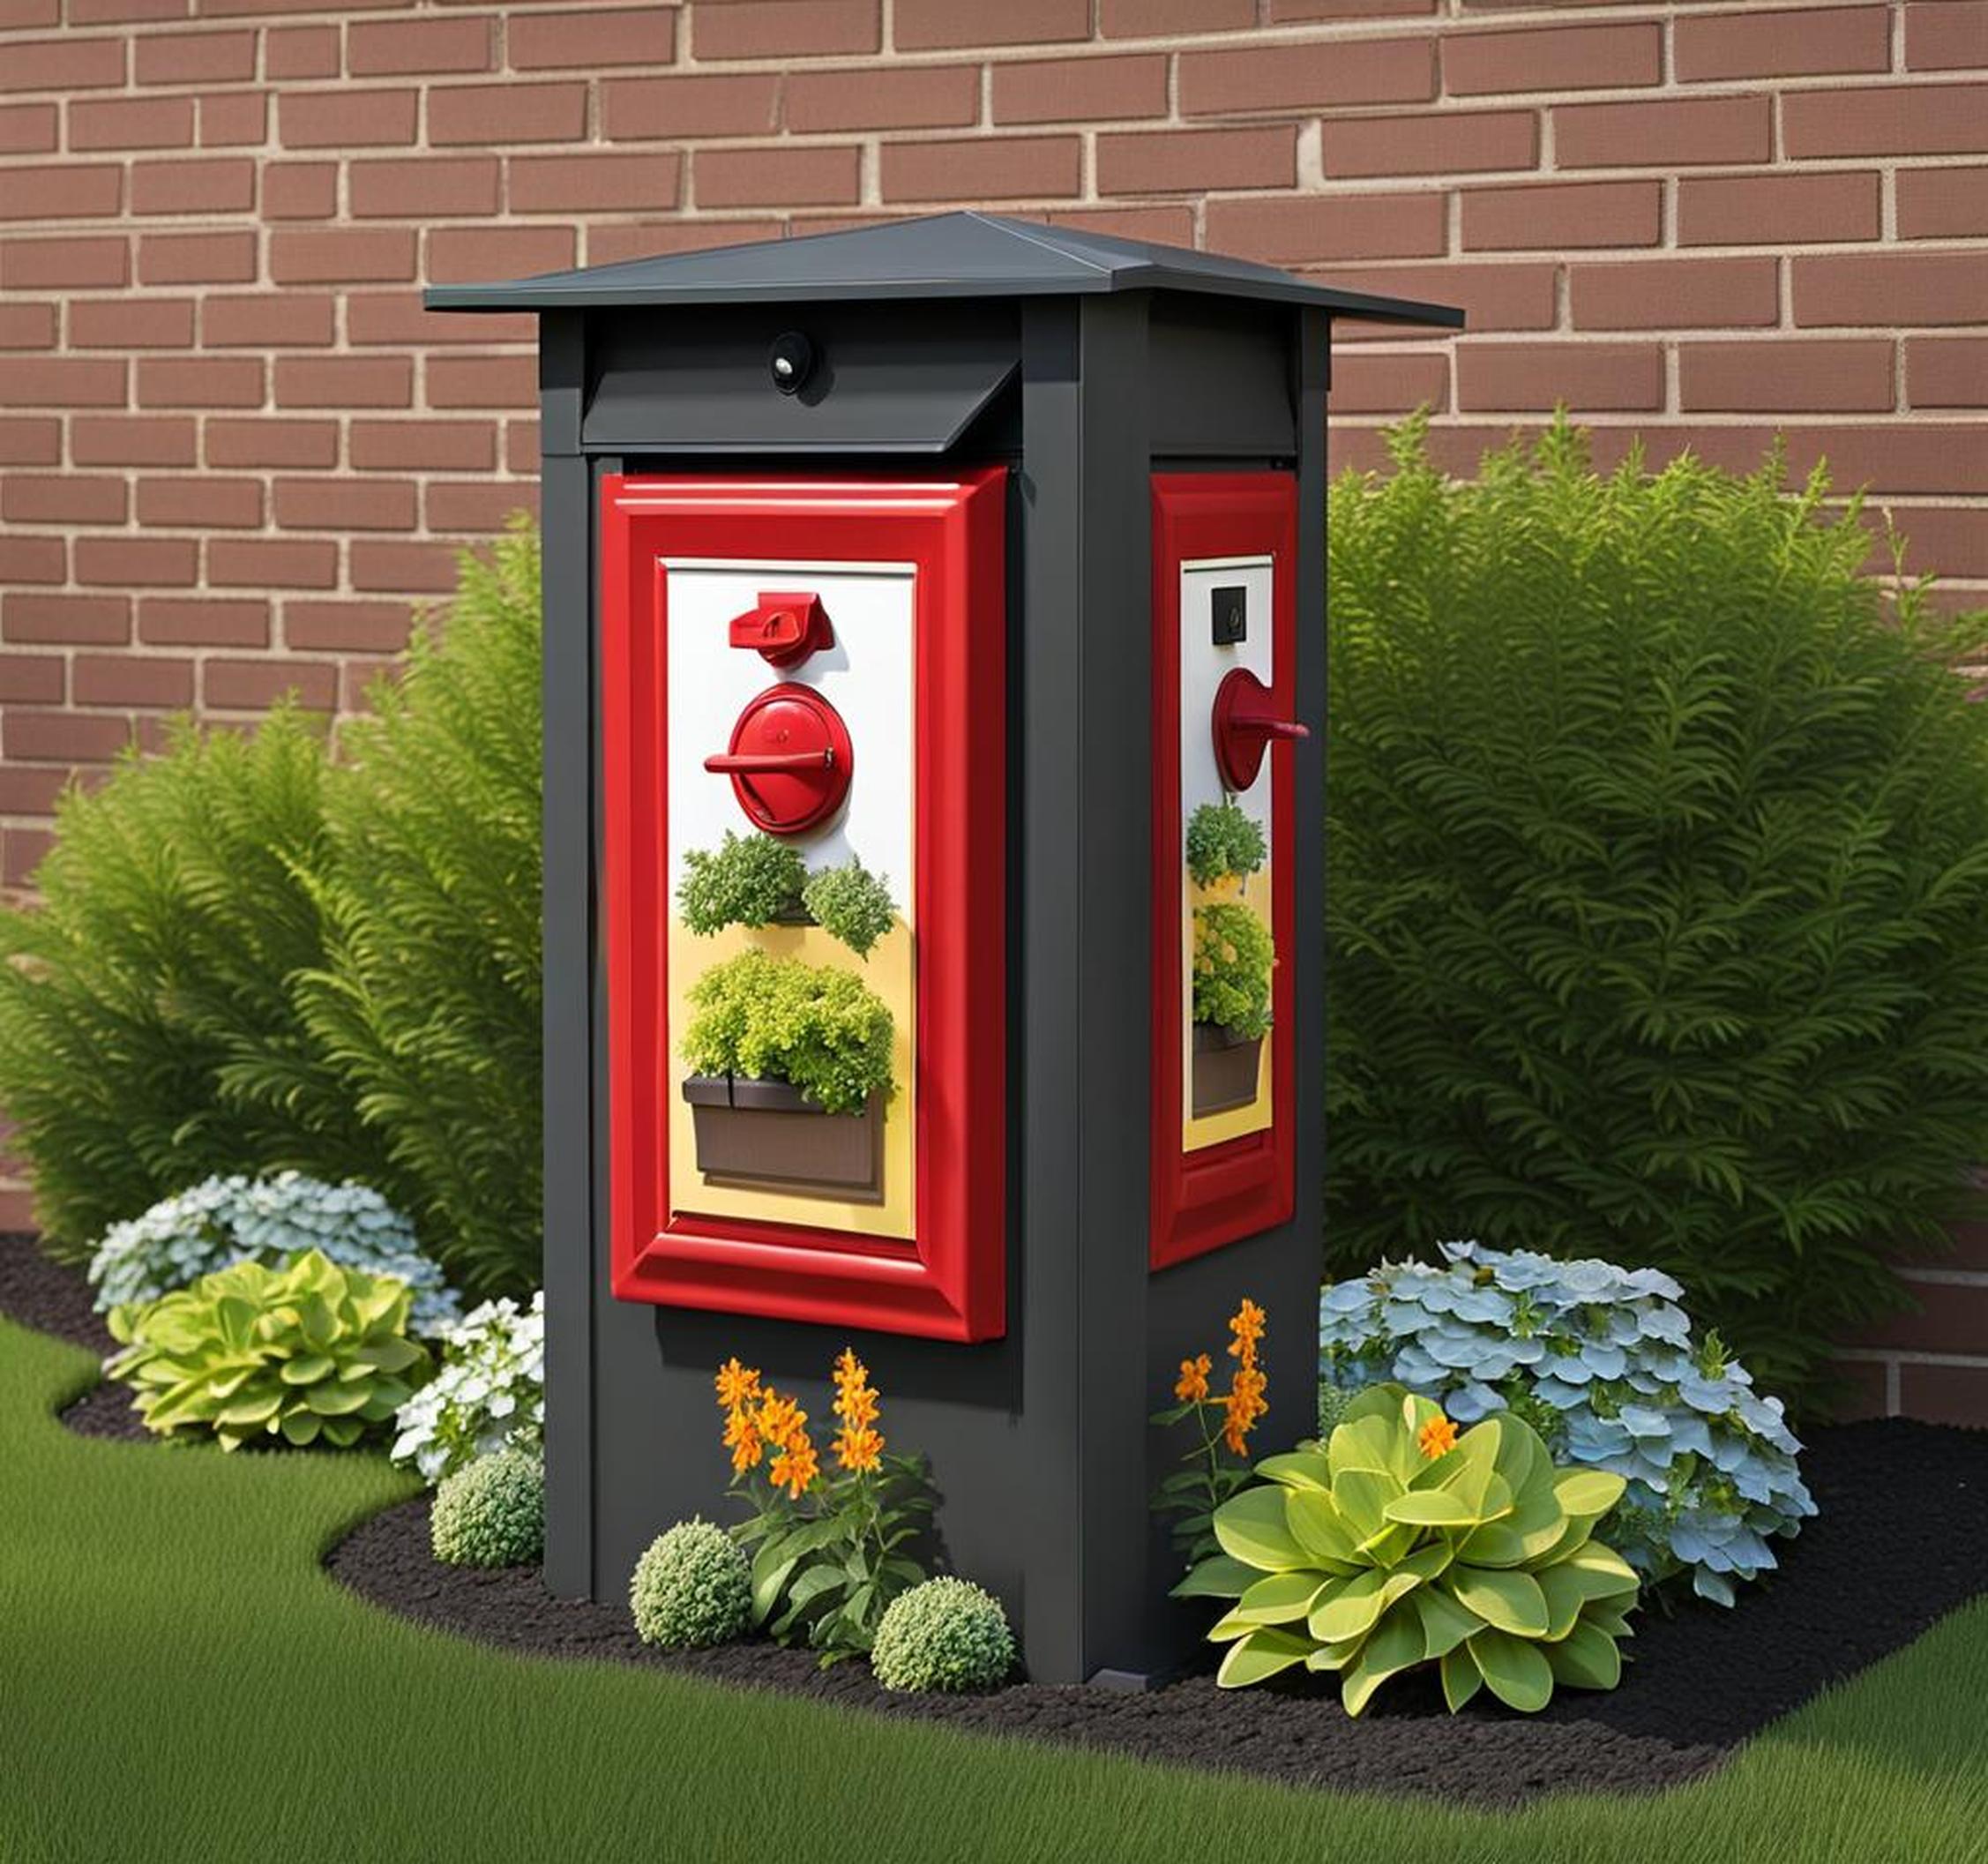 landscaping around utility boxes